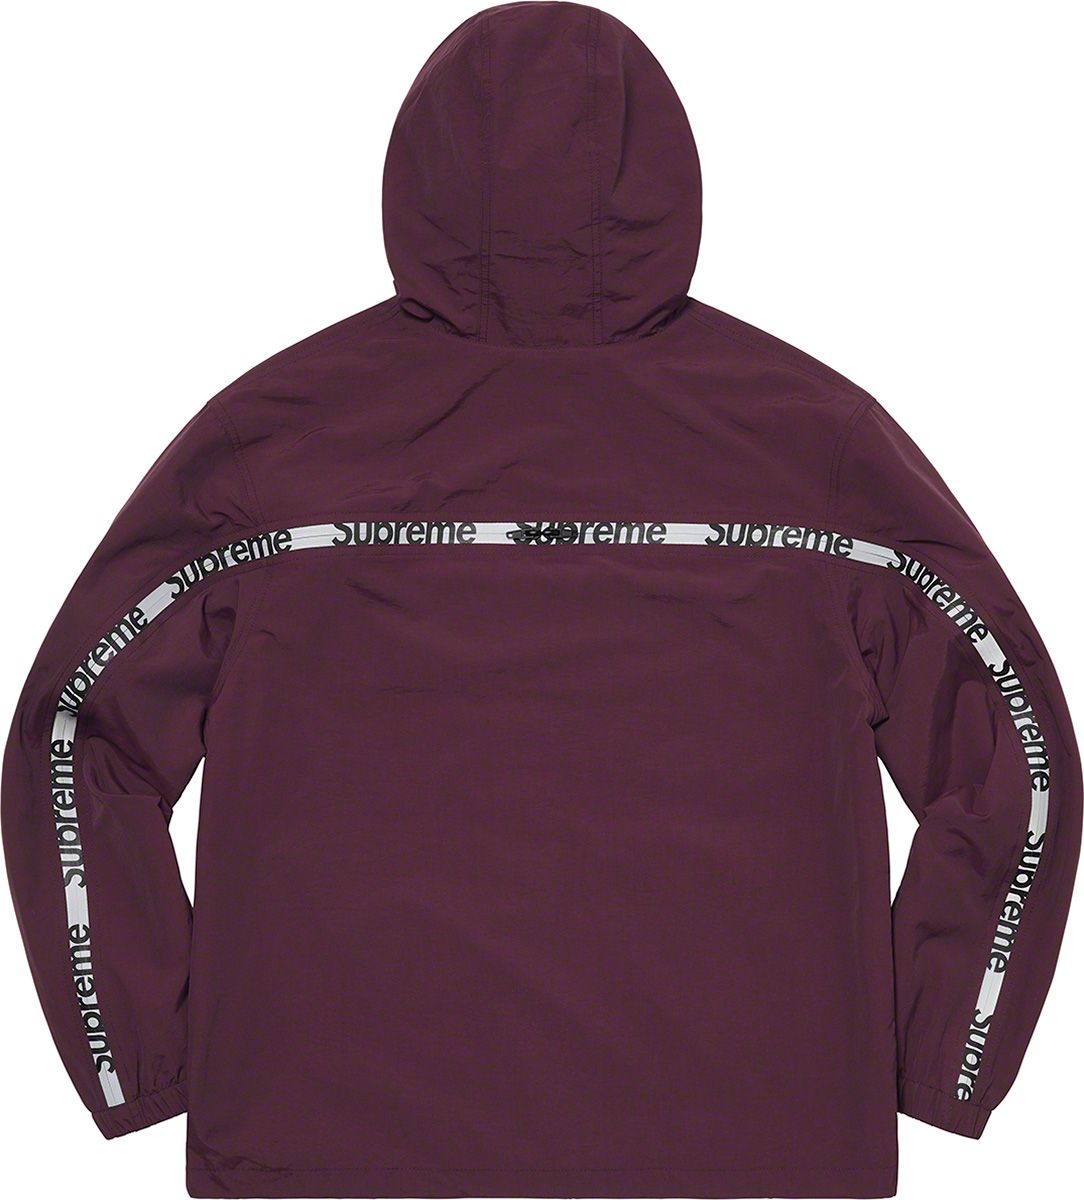 Reflective Zip Hooded Jacket - Spring/Summer 2021 Preview 